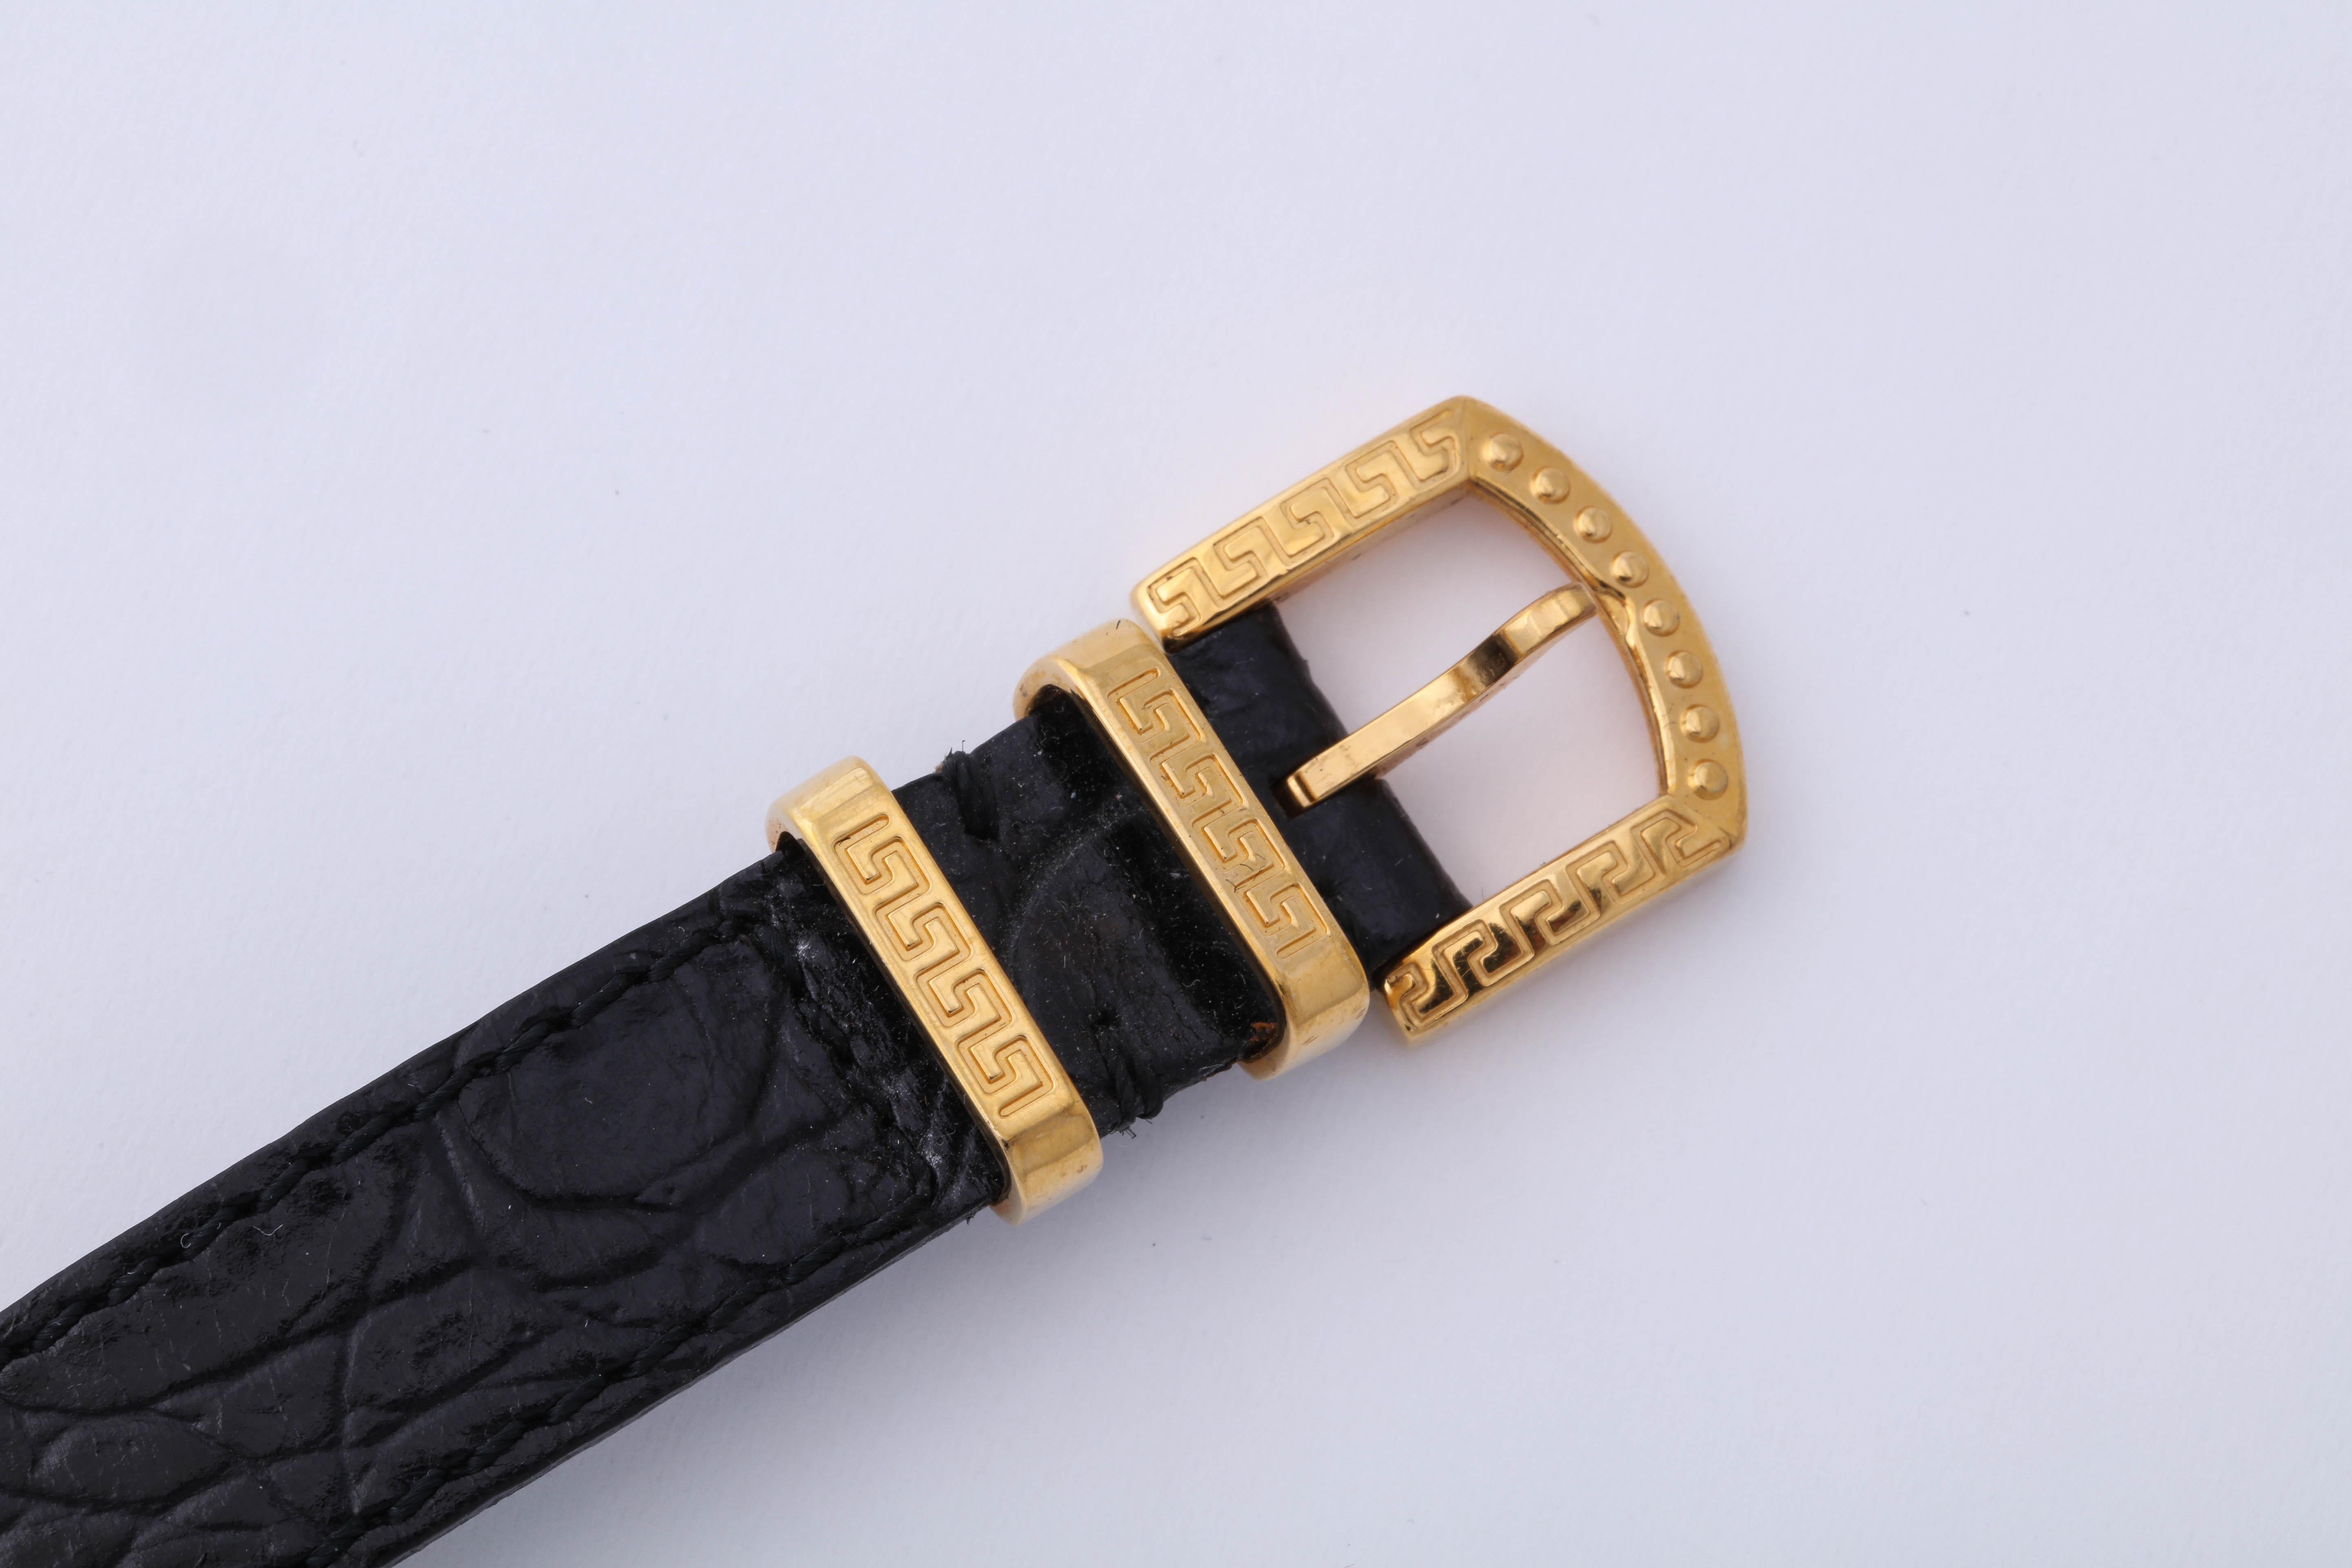   Gianni Versace Medusa Watch with Black Belt  For Sale 1